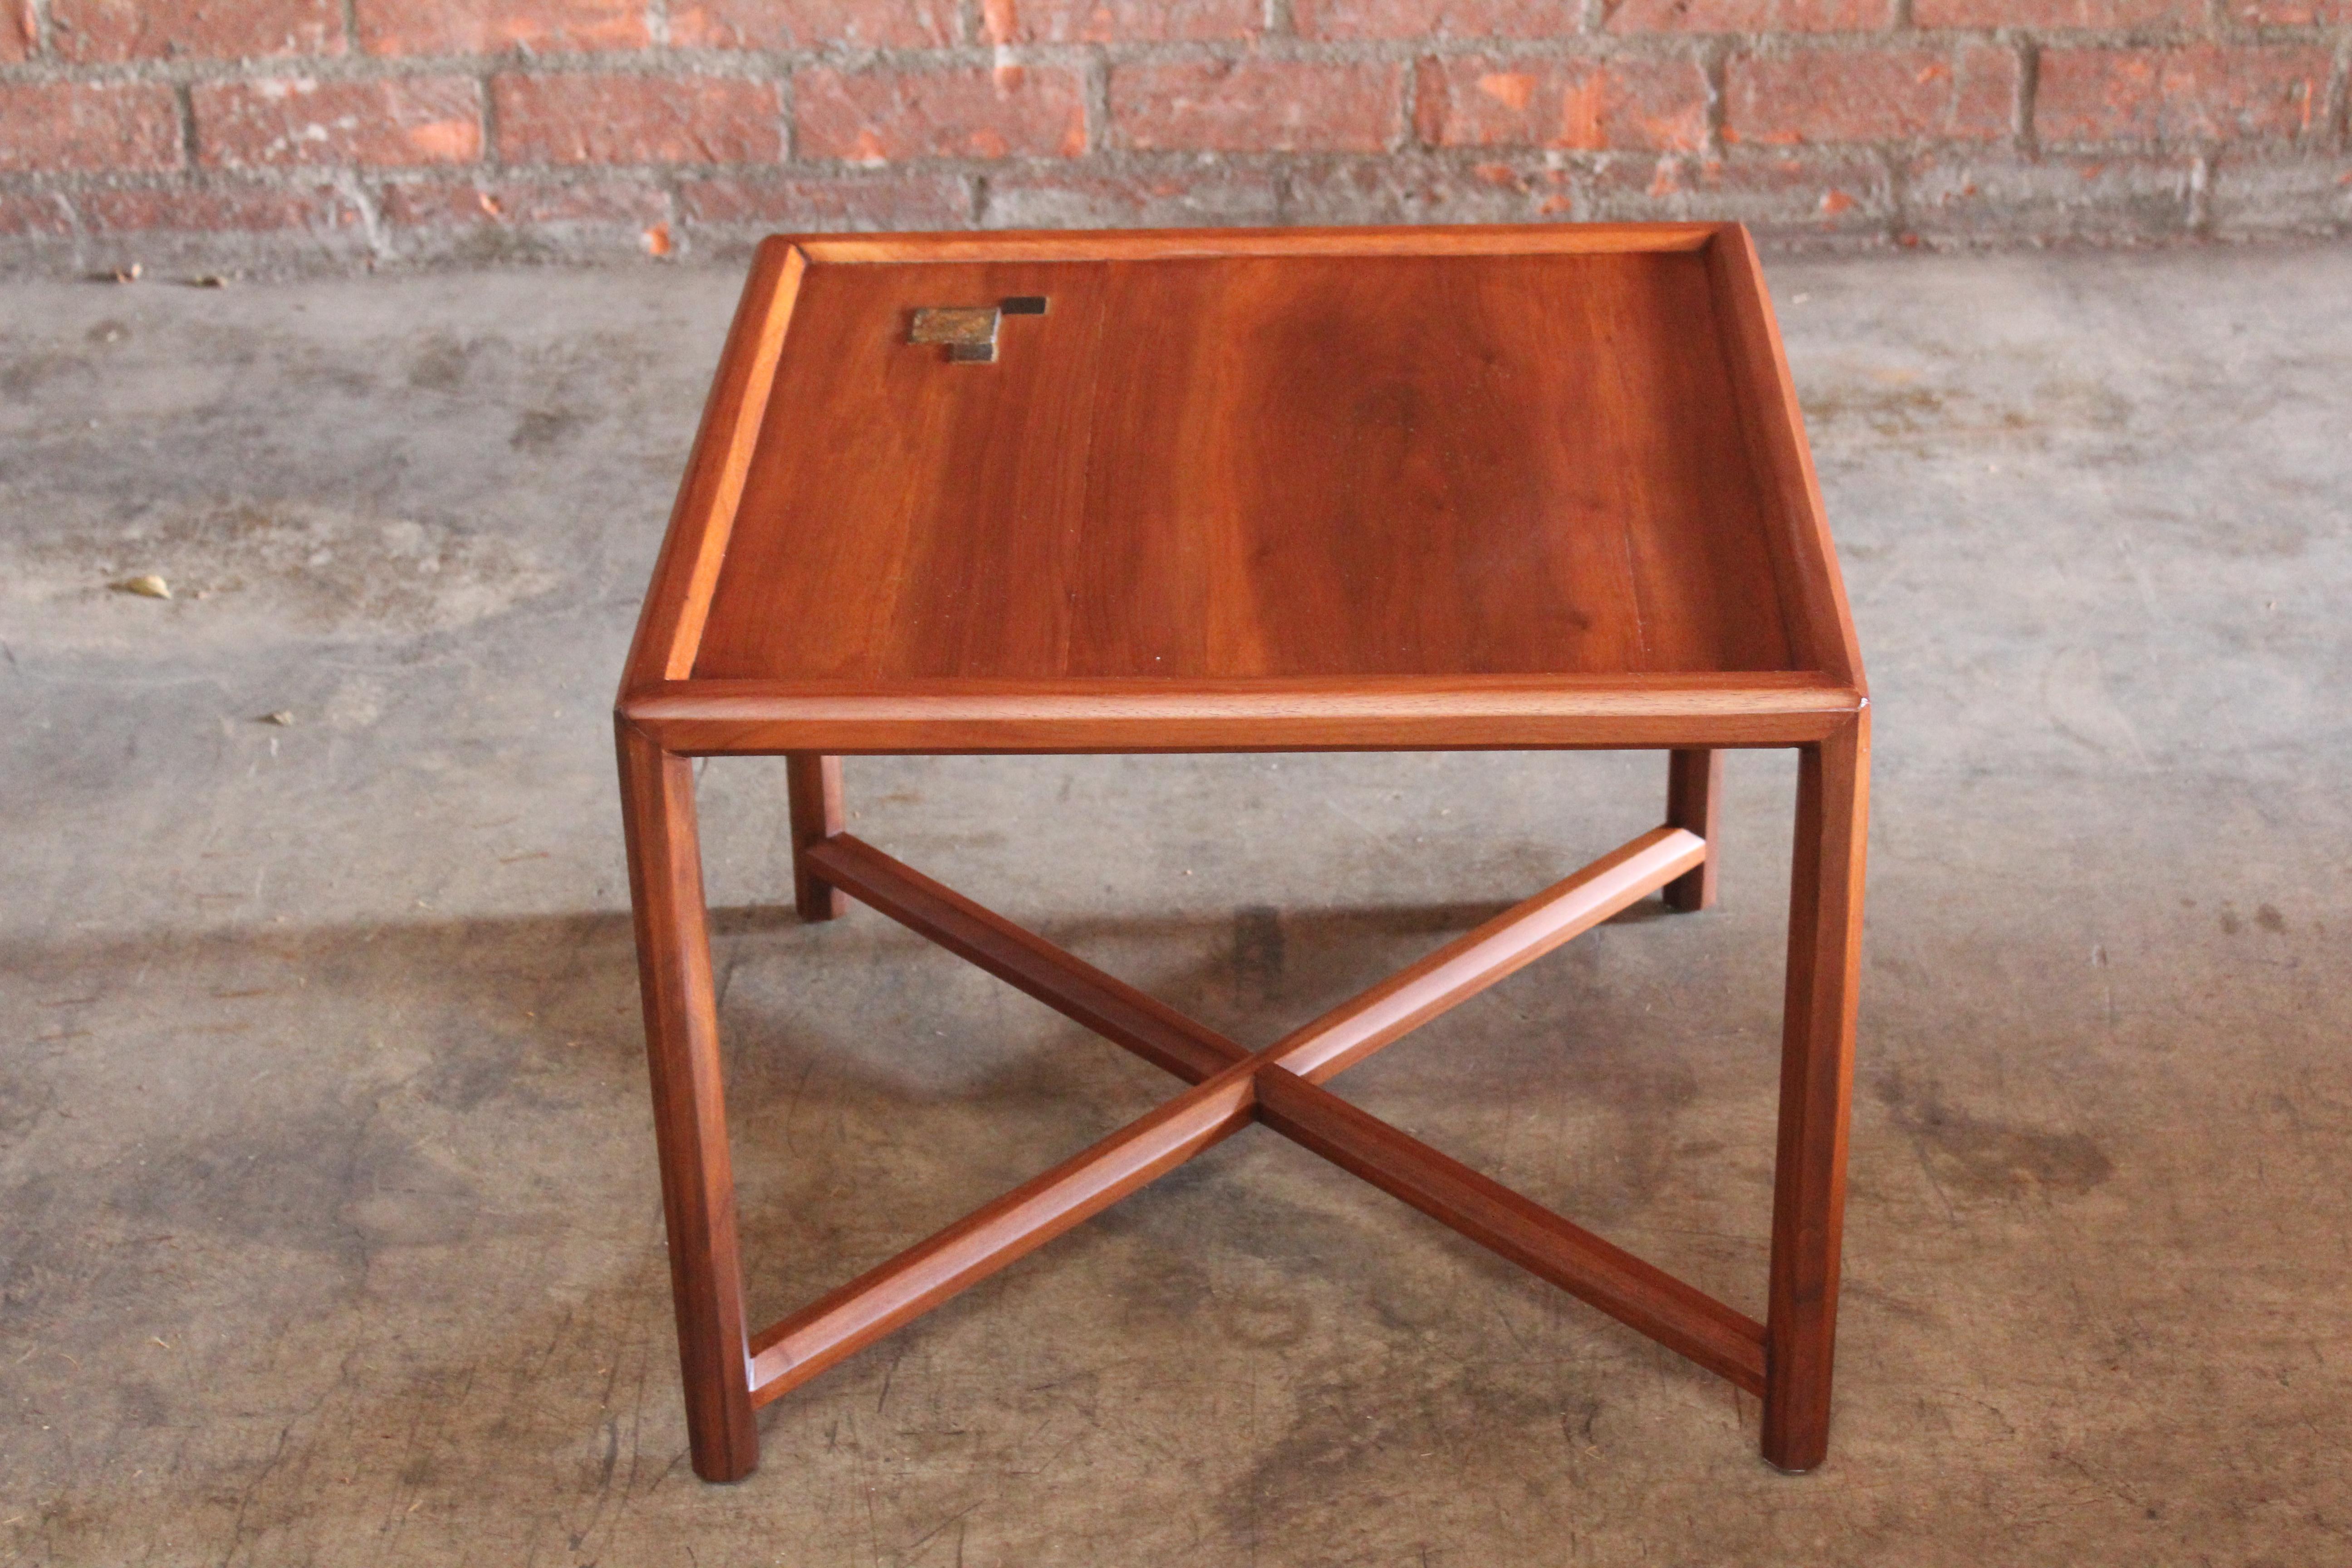 A solid walnut end table designed by Edward Wormley for the Janus Collection by Dunbar, 1957. Features Tiffany glass inlaid tiles. The table has been recently refinished and is in excellent condition.